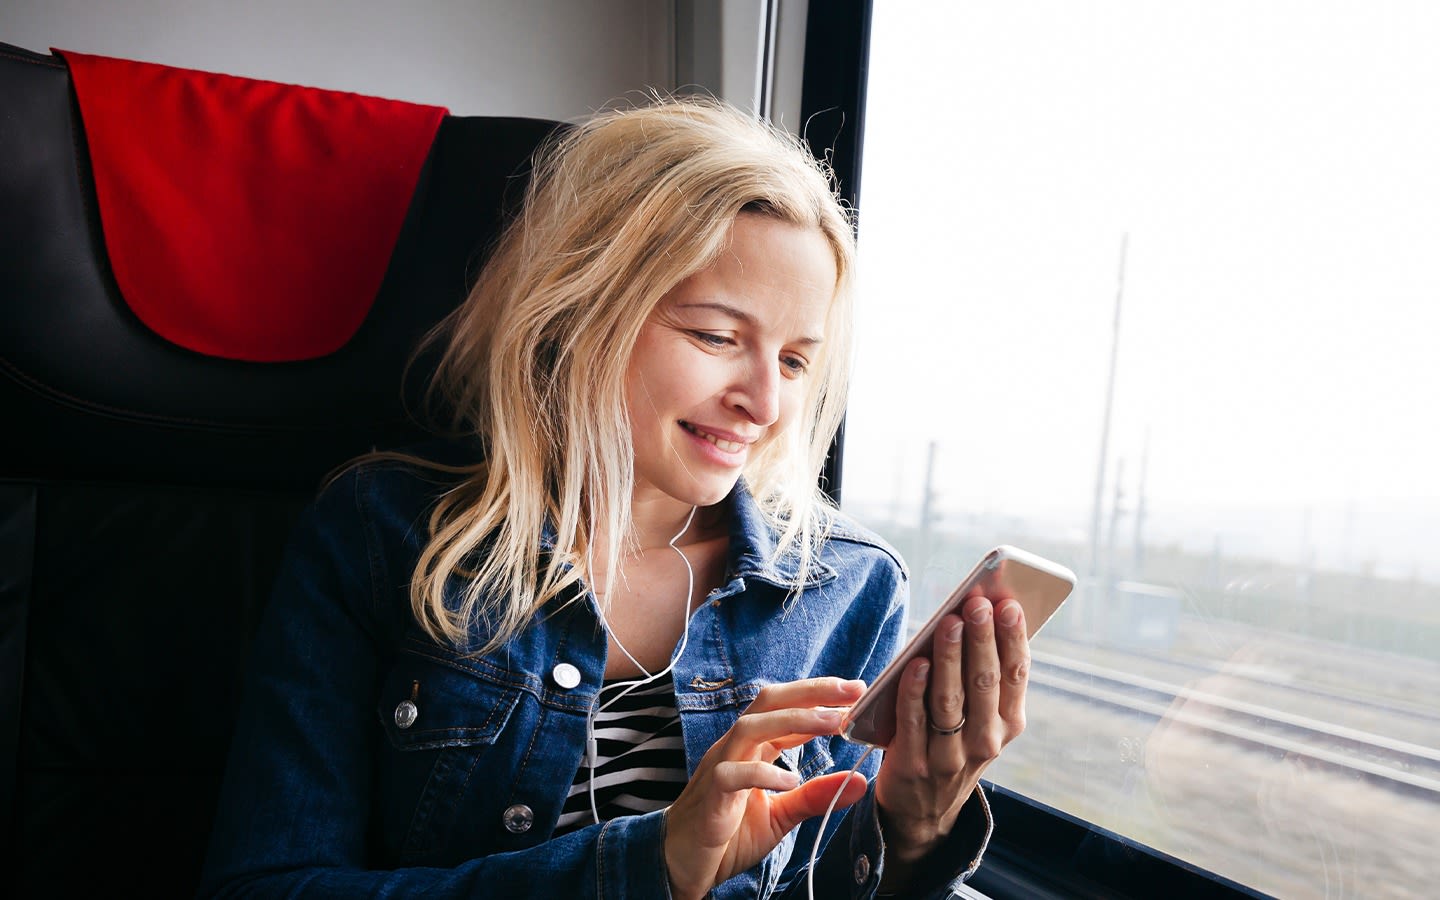 Image of lady smiling on her phone on the train.